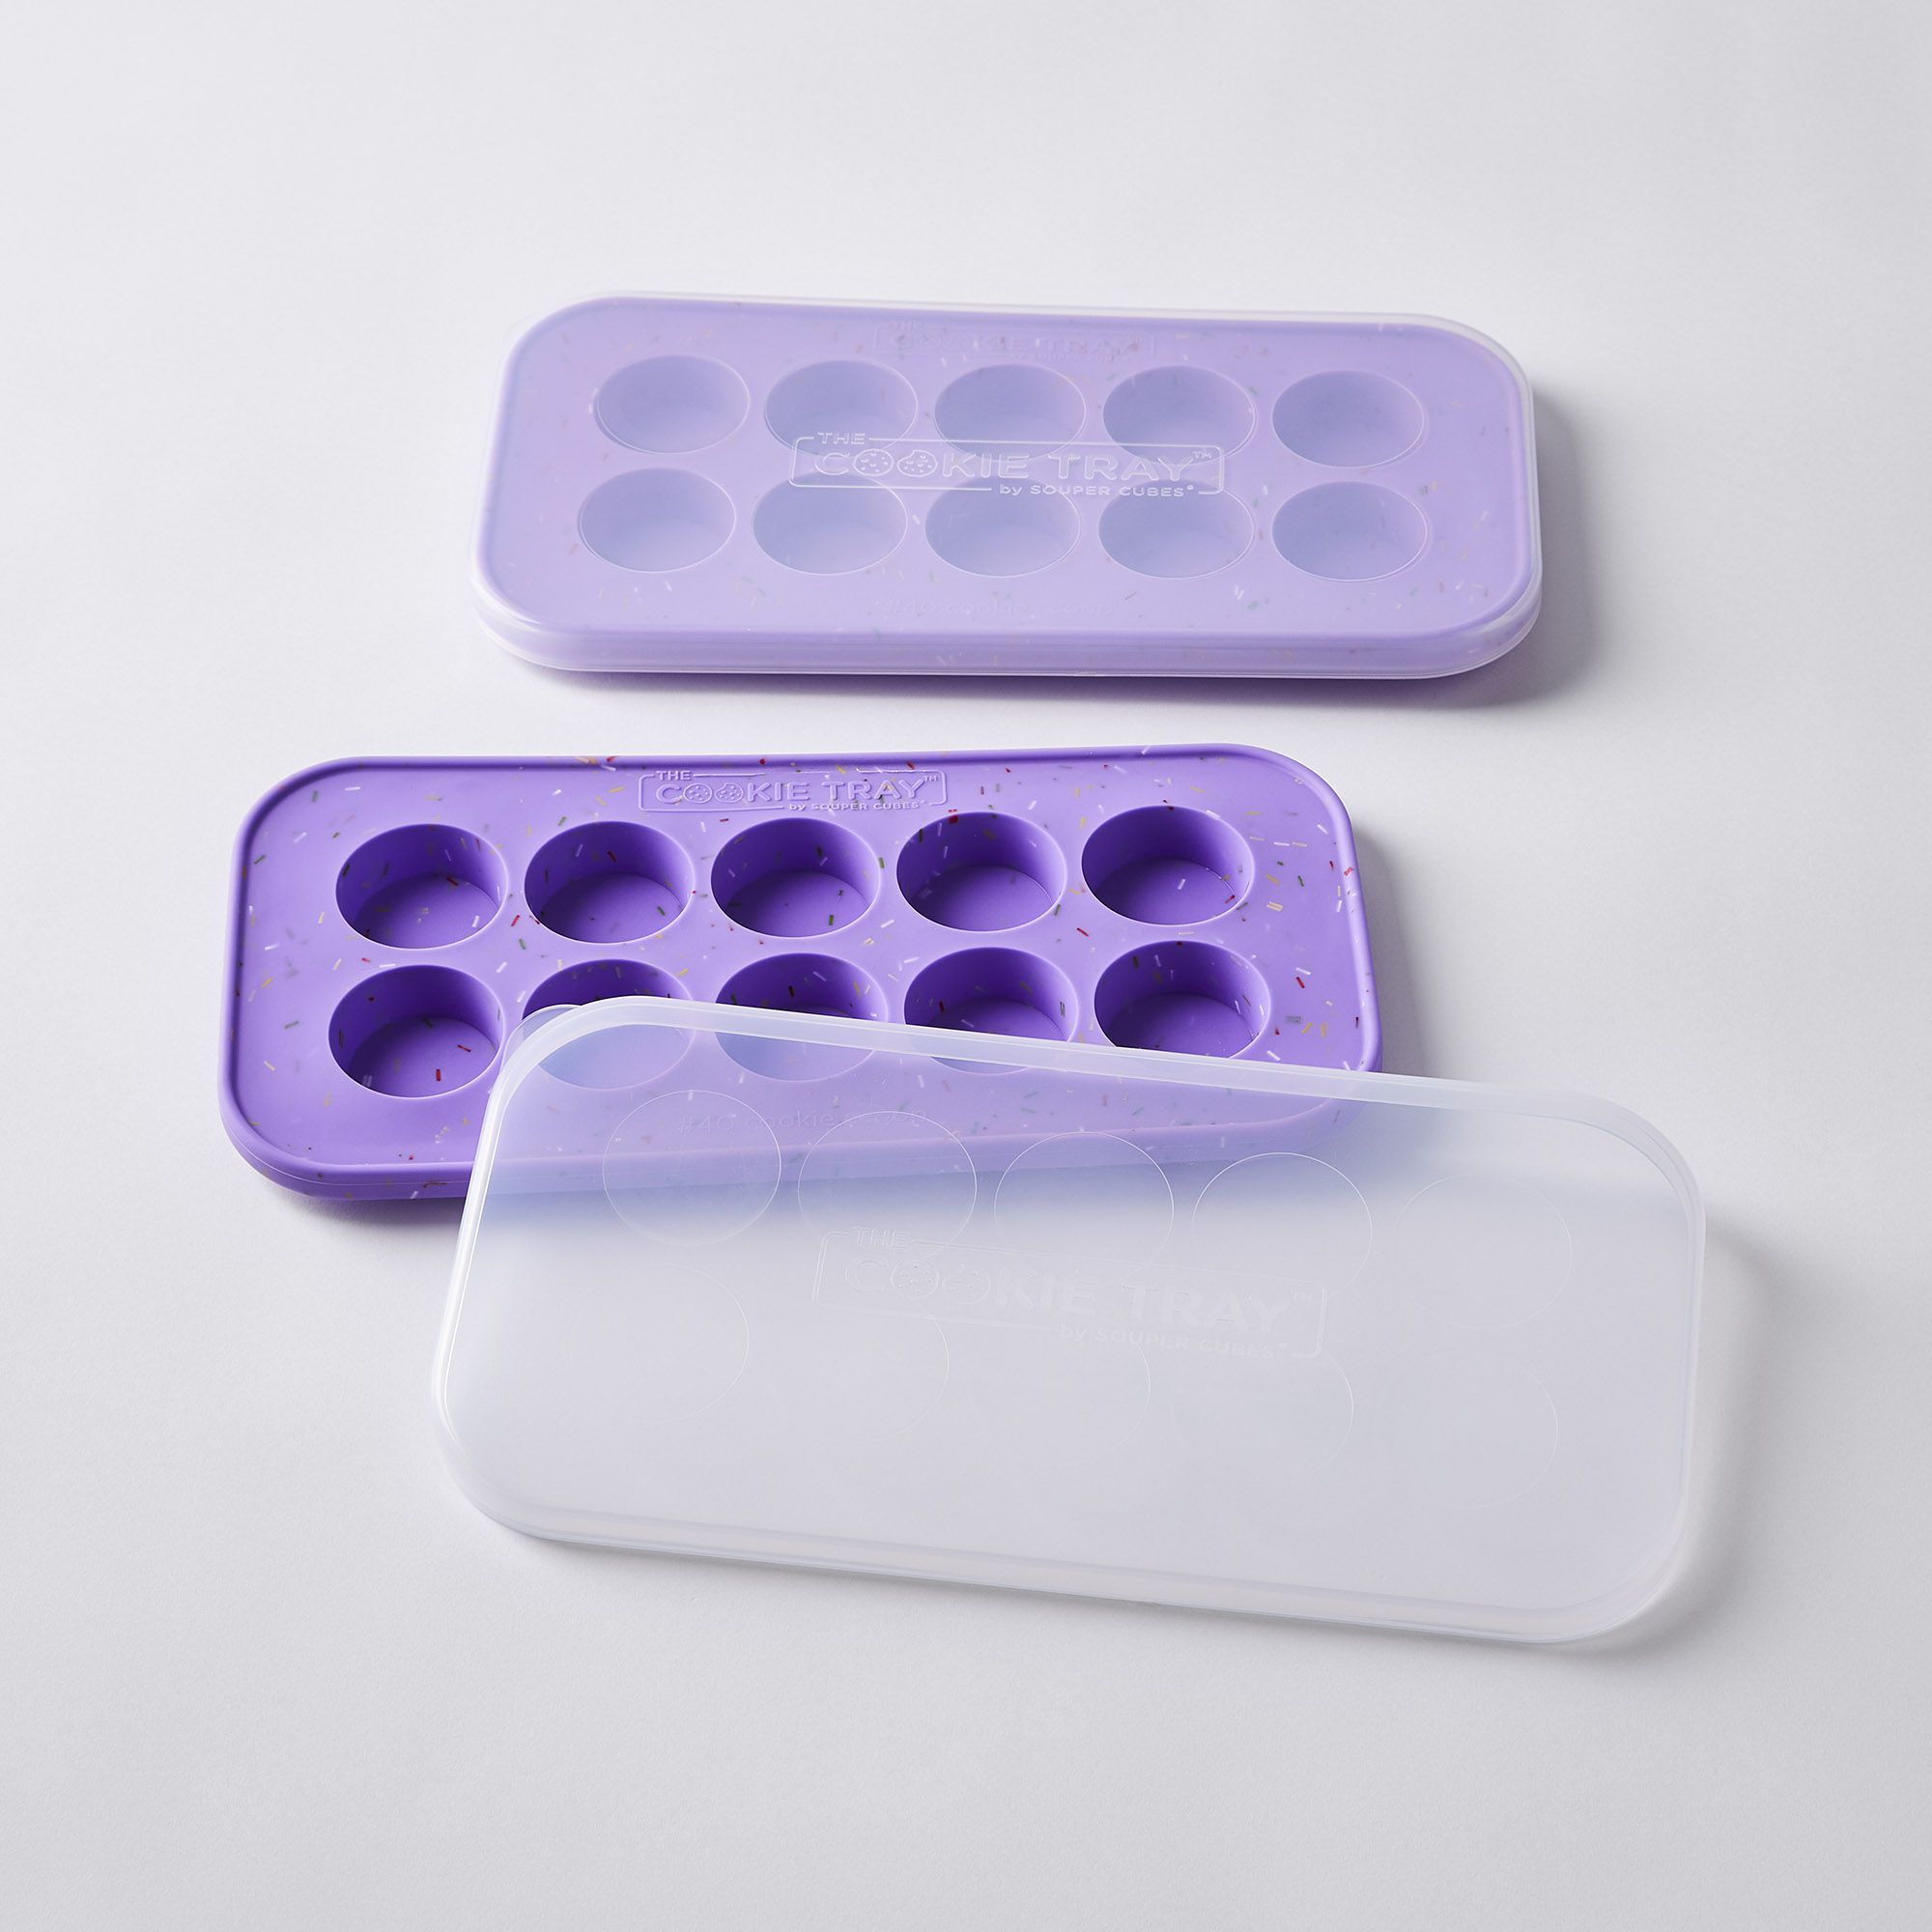 Cookie Dough Freezer Trays — The Culinary Shut In